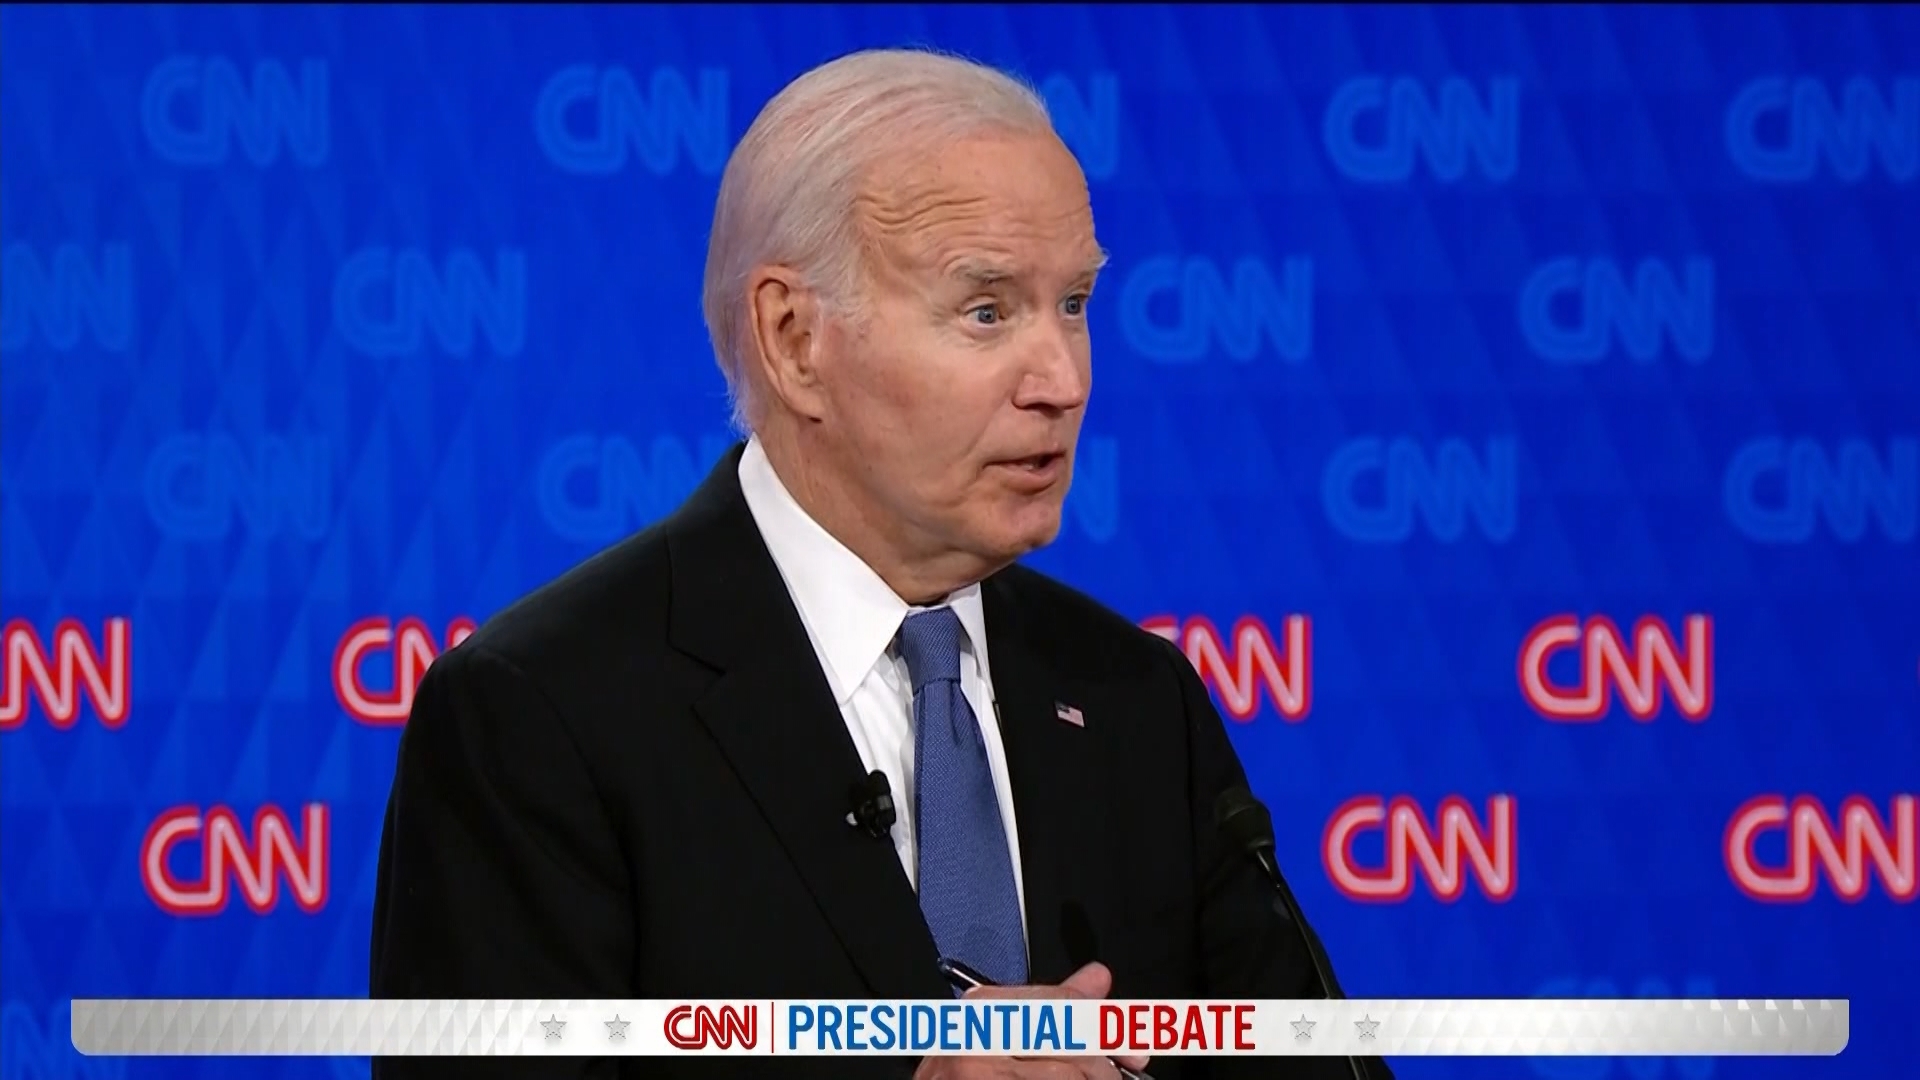 Trump made fun of Biden during the end of a topic.